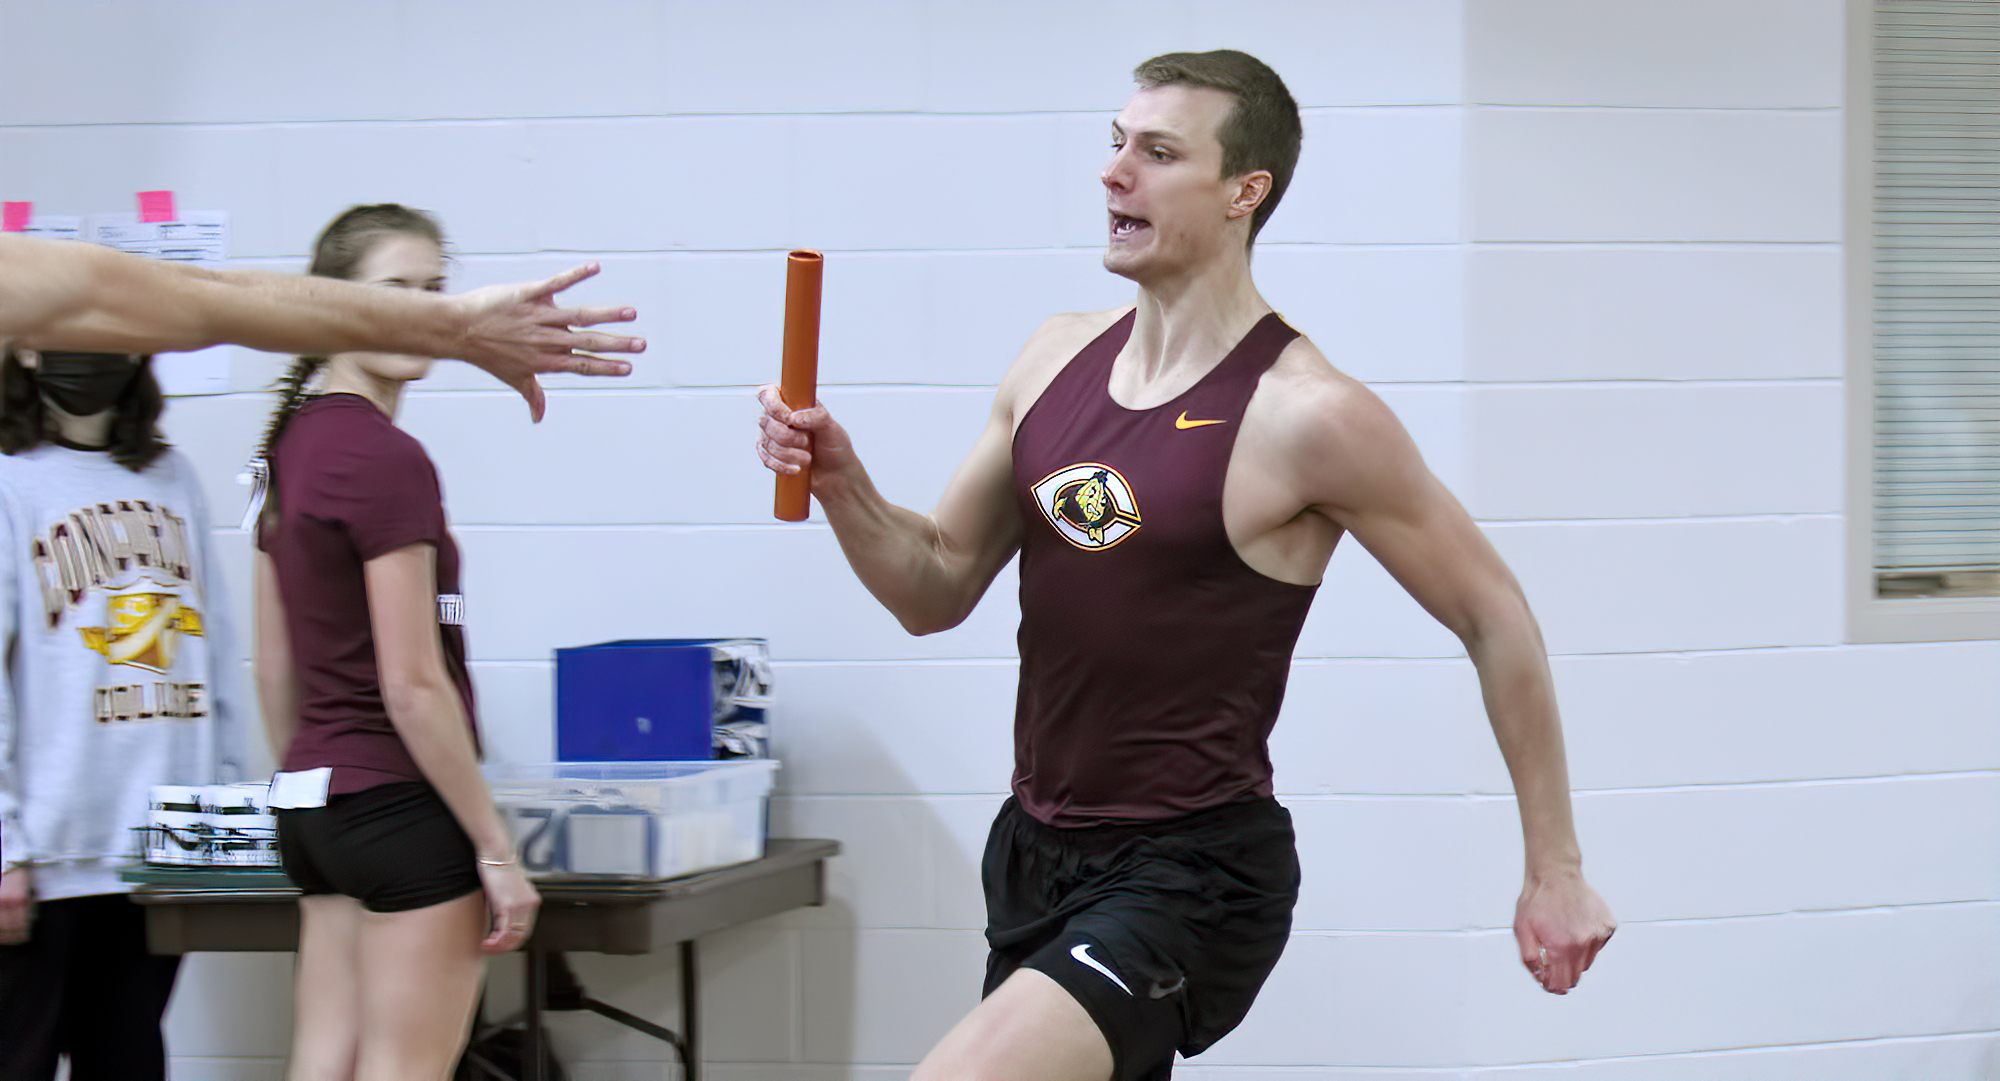 Senior Cal Wright ran the lead leg of the Cobber 4x400-meter relay team which ran the fastest time in the MIAC as they placed second at UND.